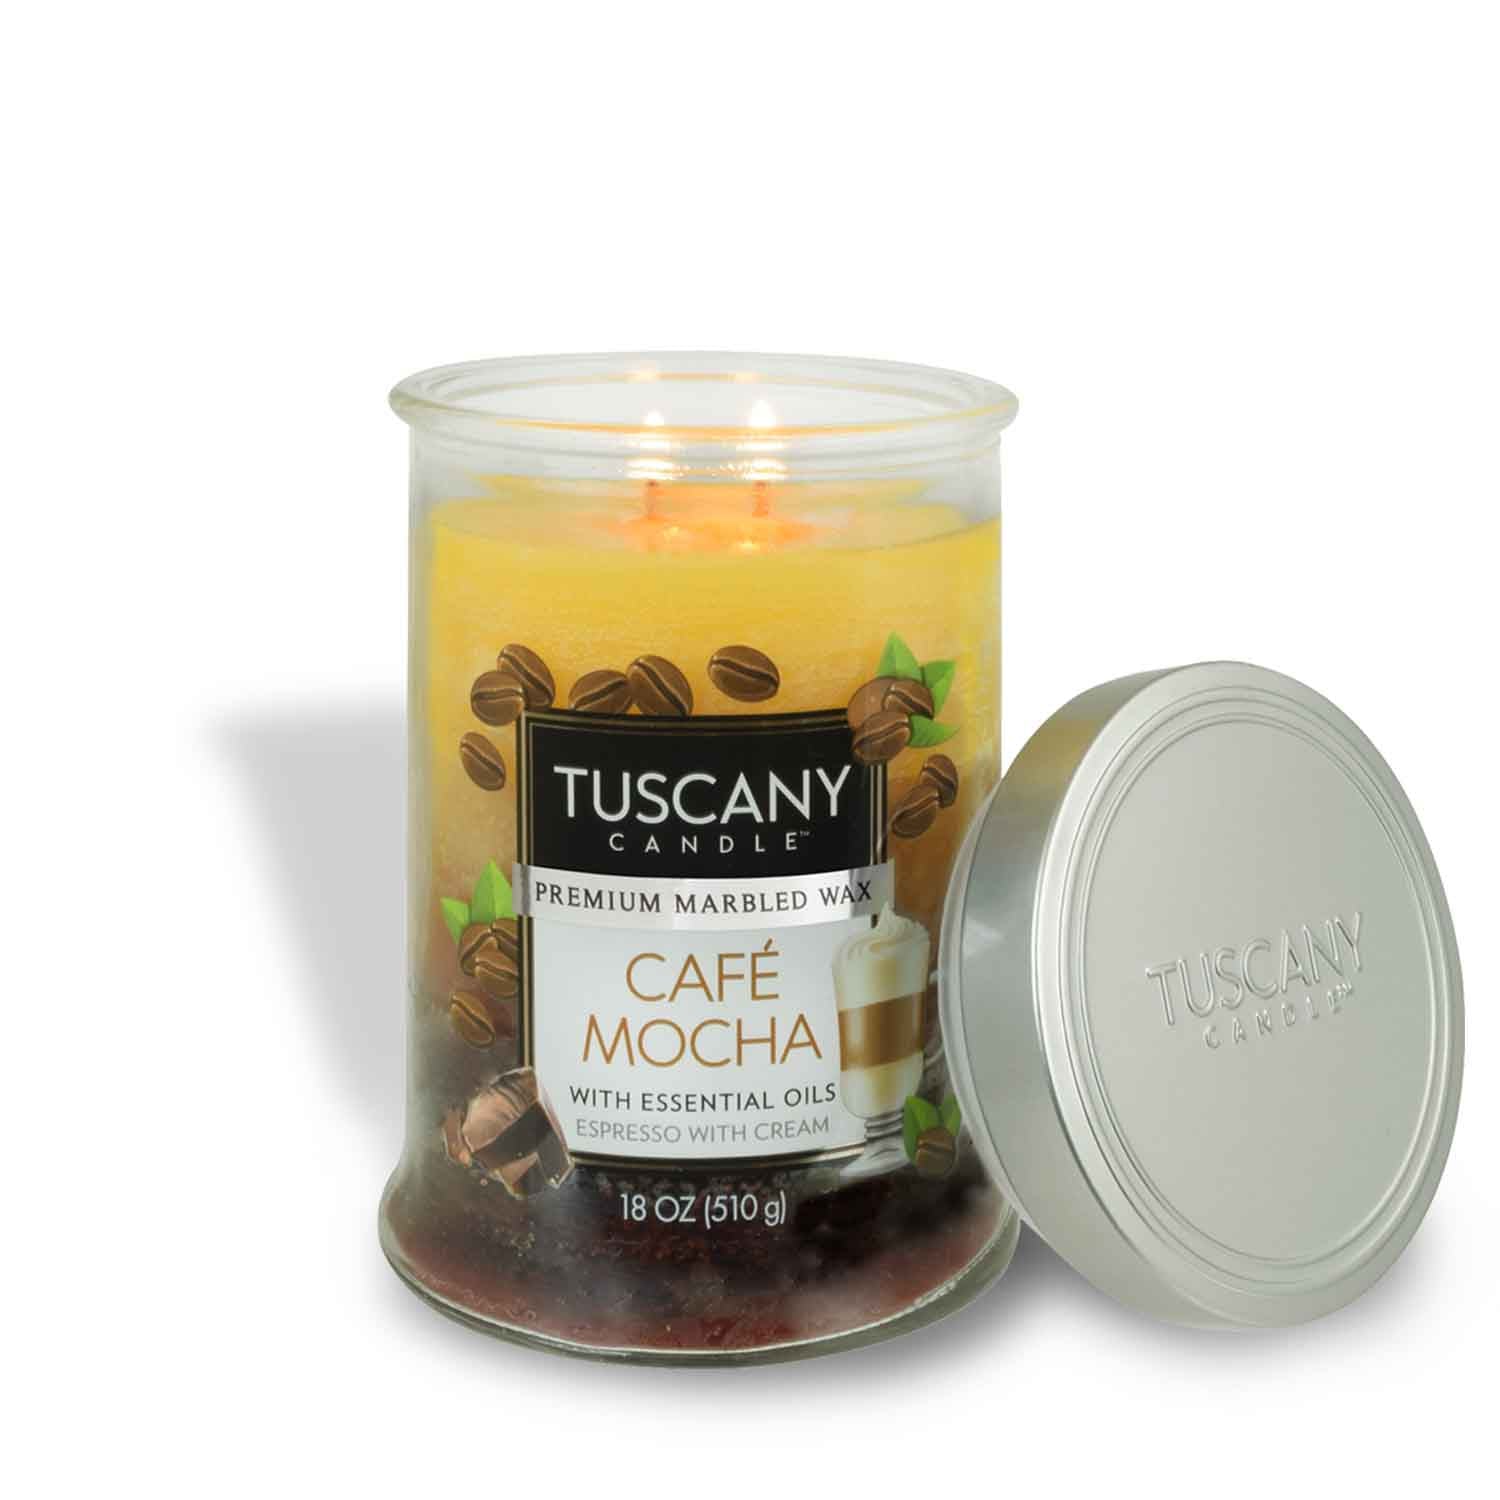 Tuscany Candle's Café Mocha Long-Lasting Scented Jar Candle, 18 oz coffee candle.